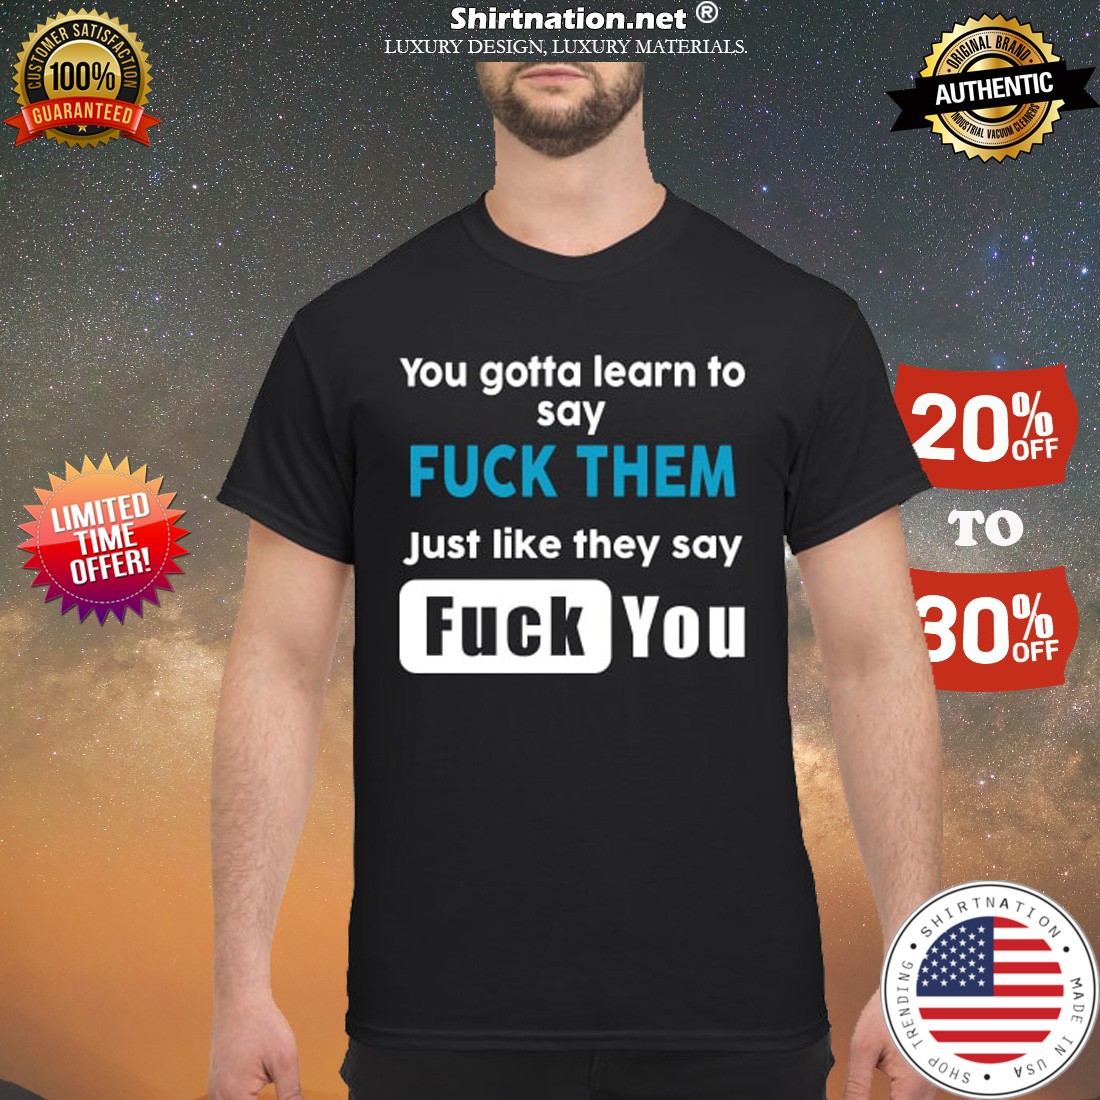 You gotta learn to say fuck them just like they say fuck you shirt